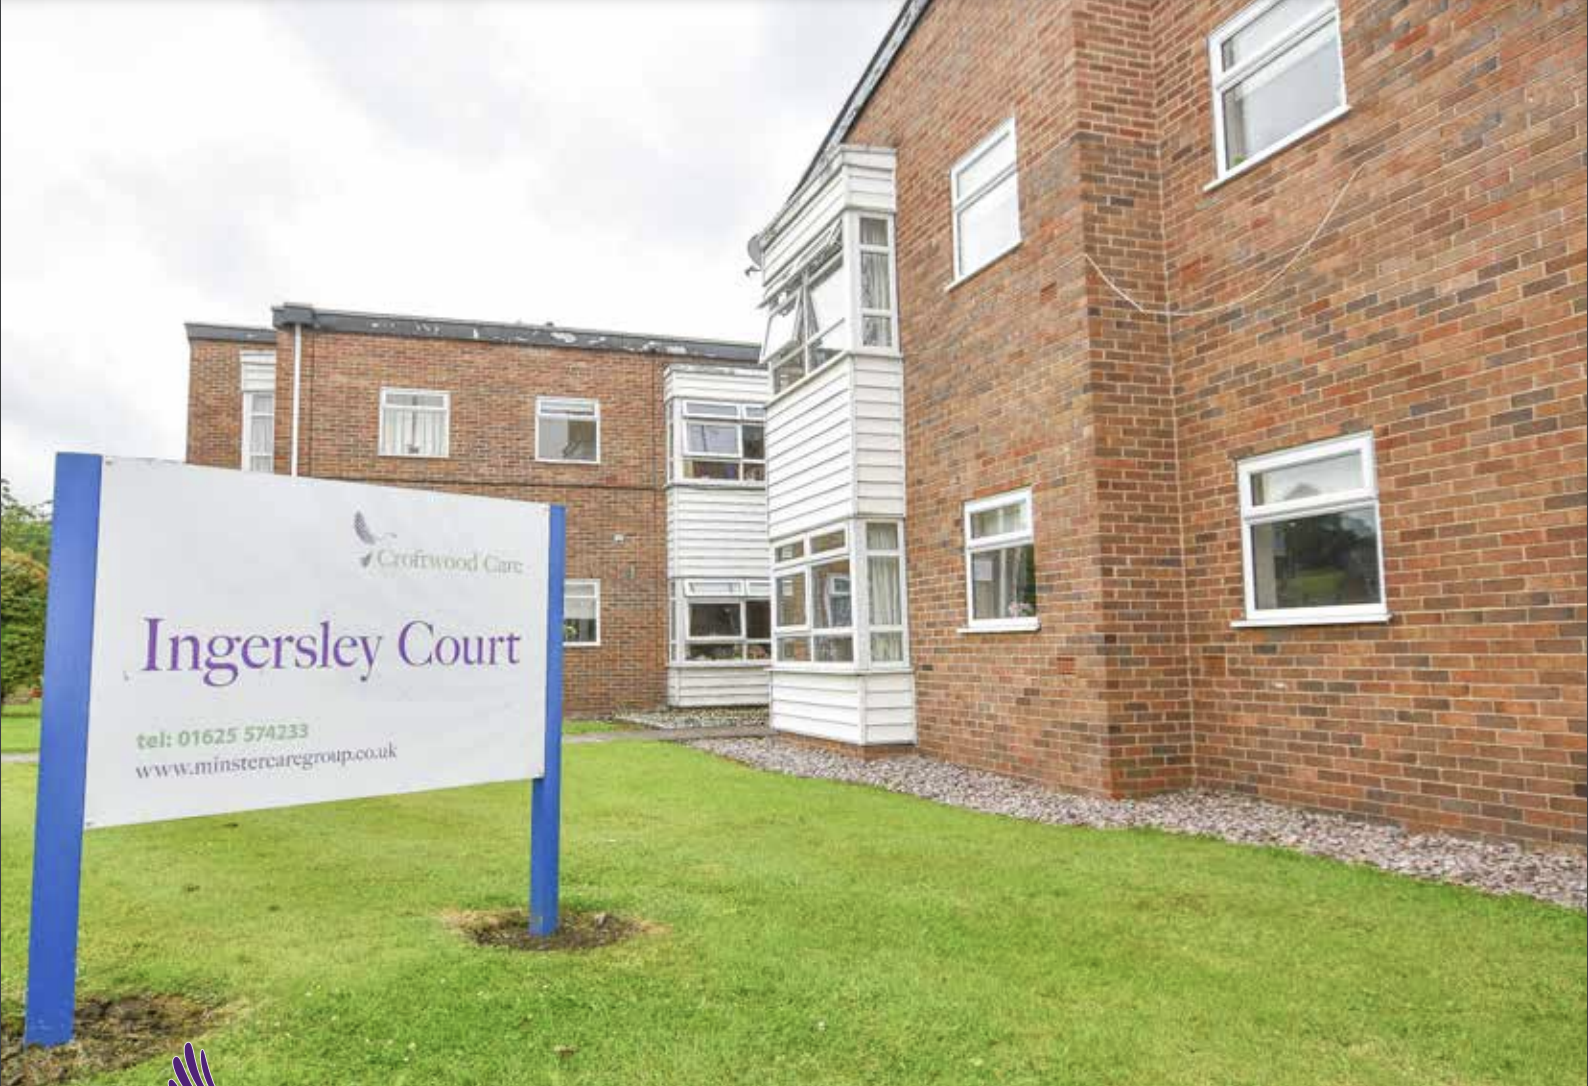 Ingersley Court care home